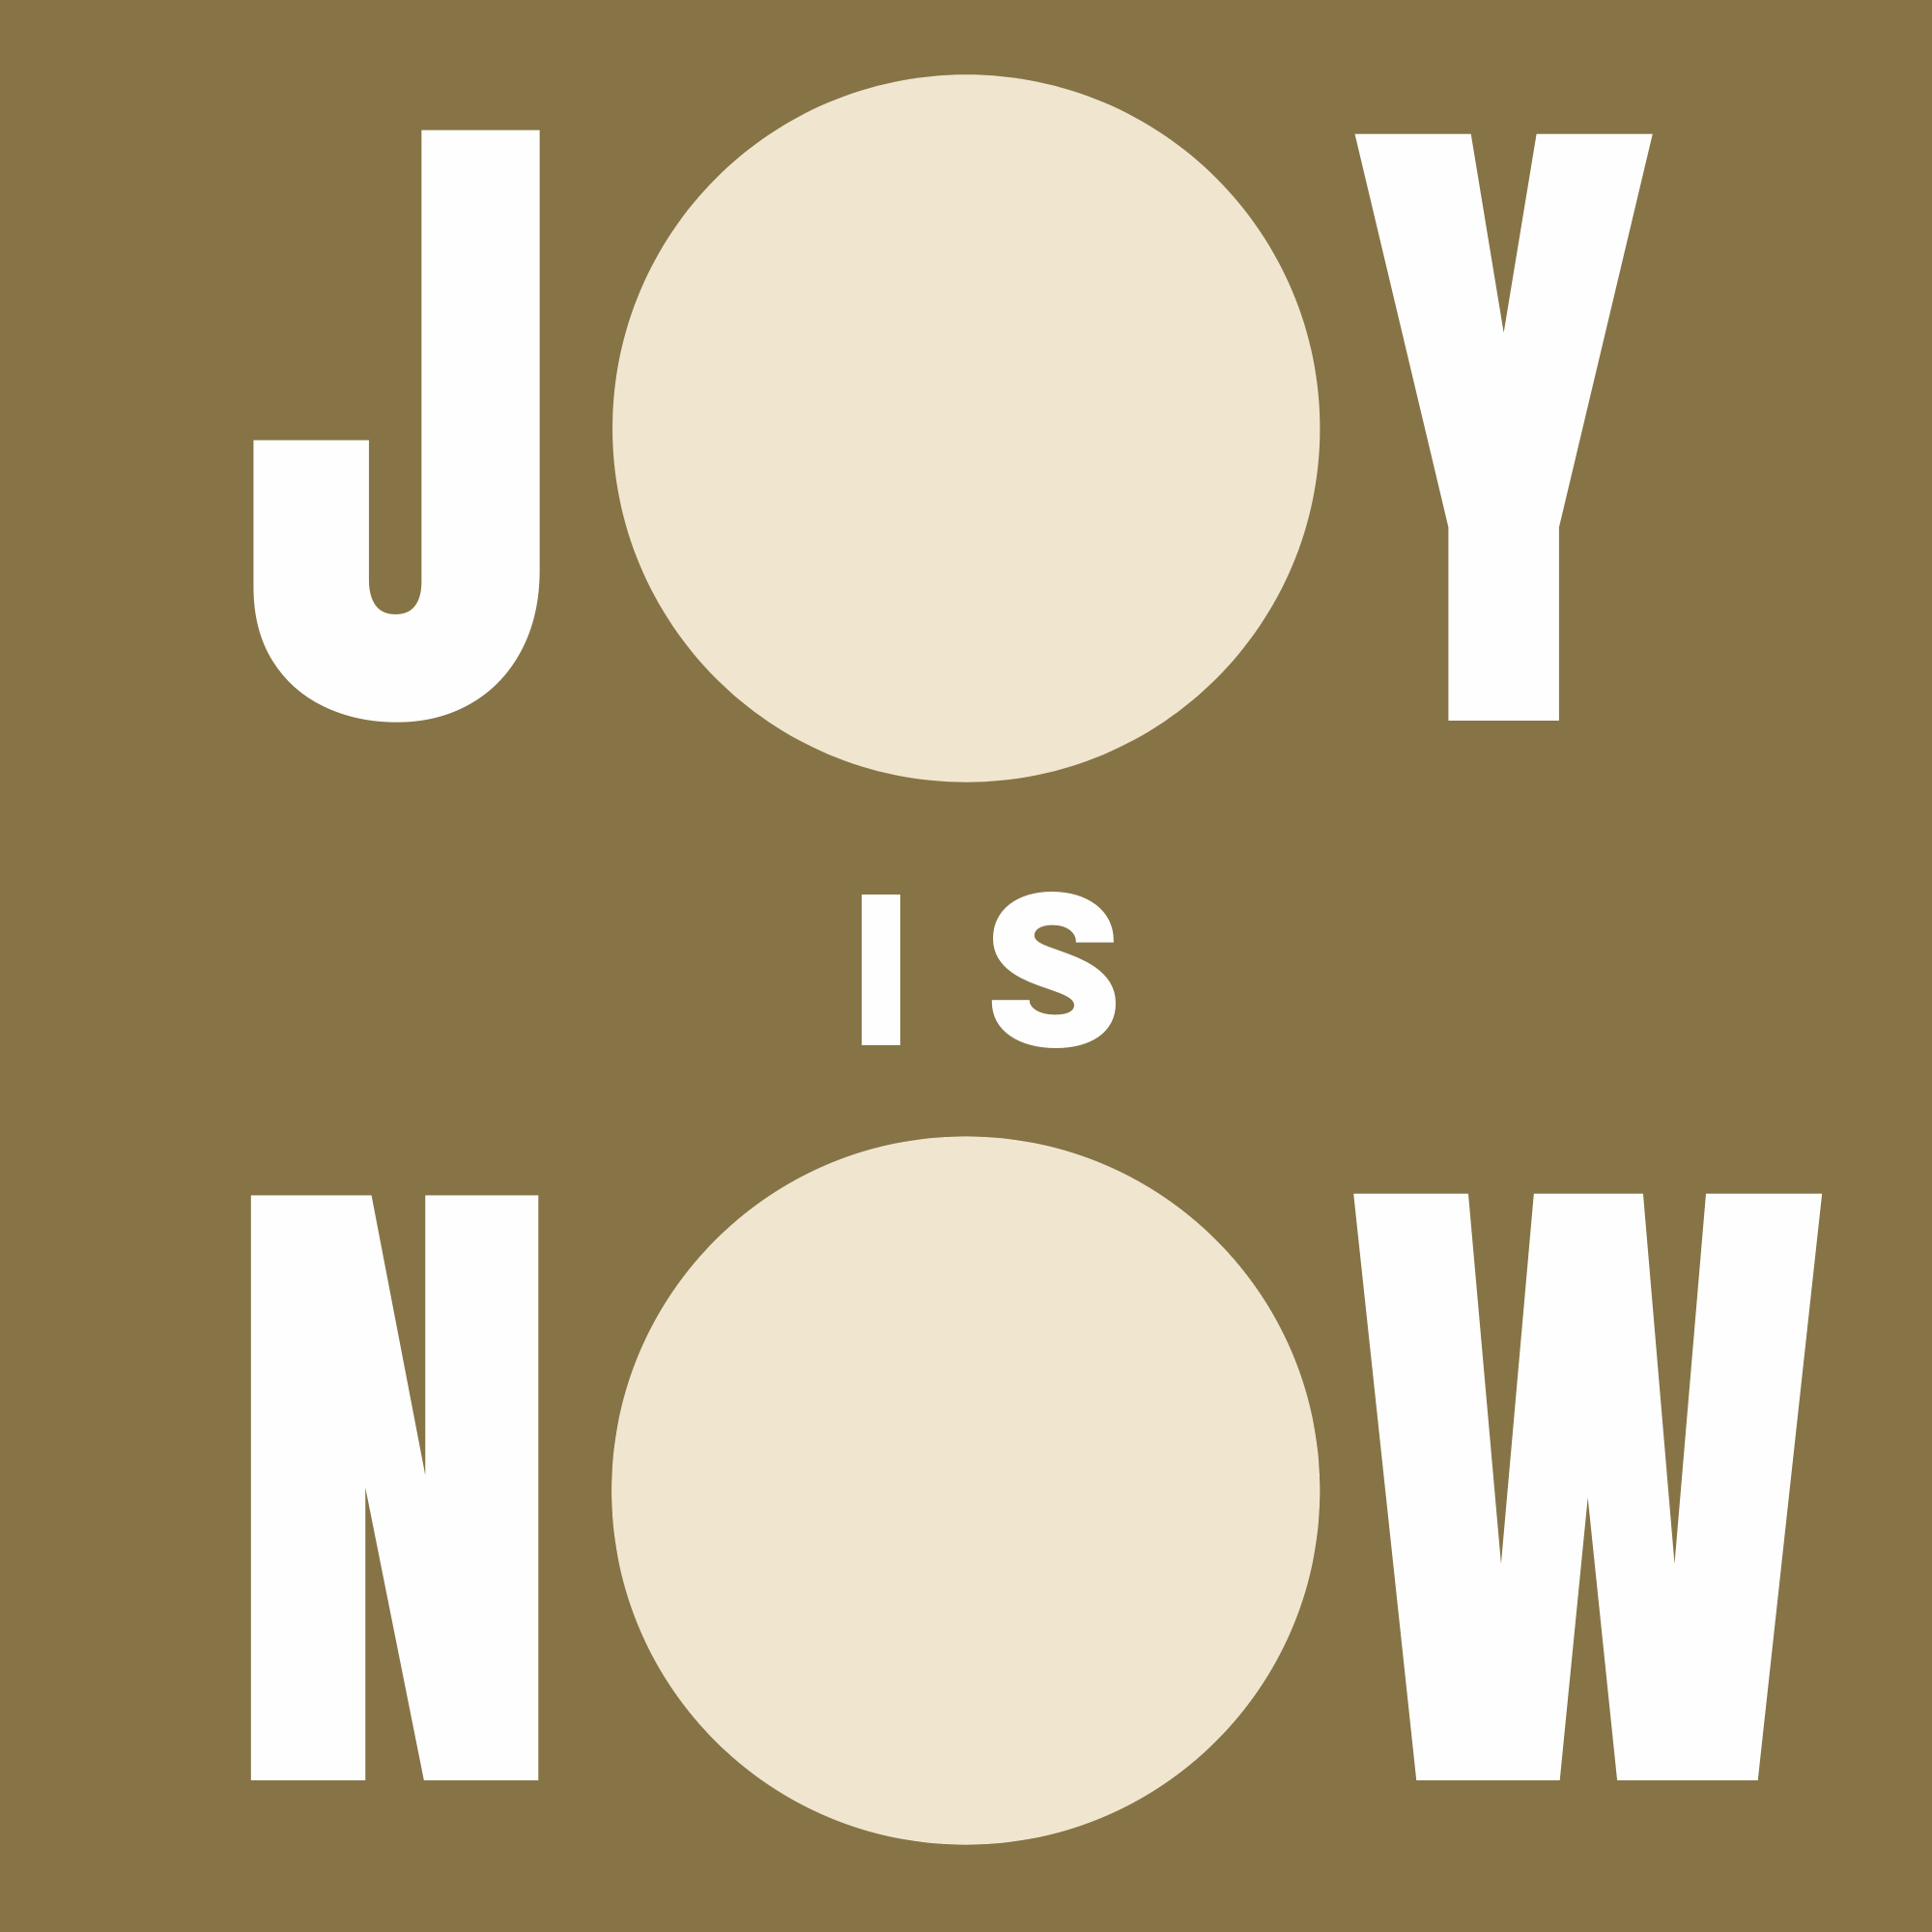 INTRODUCING JOY IS NOW THE PODCAST!